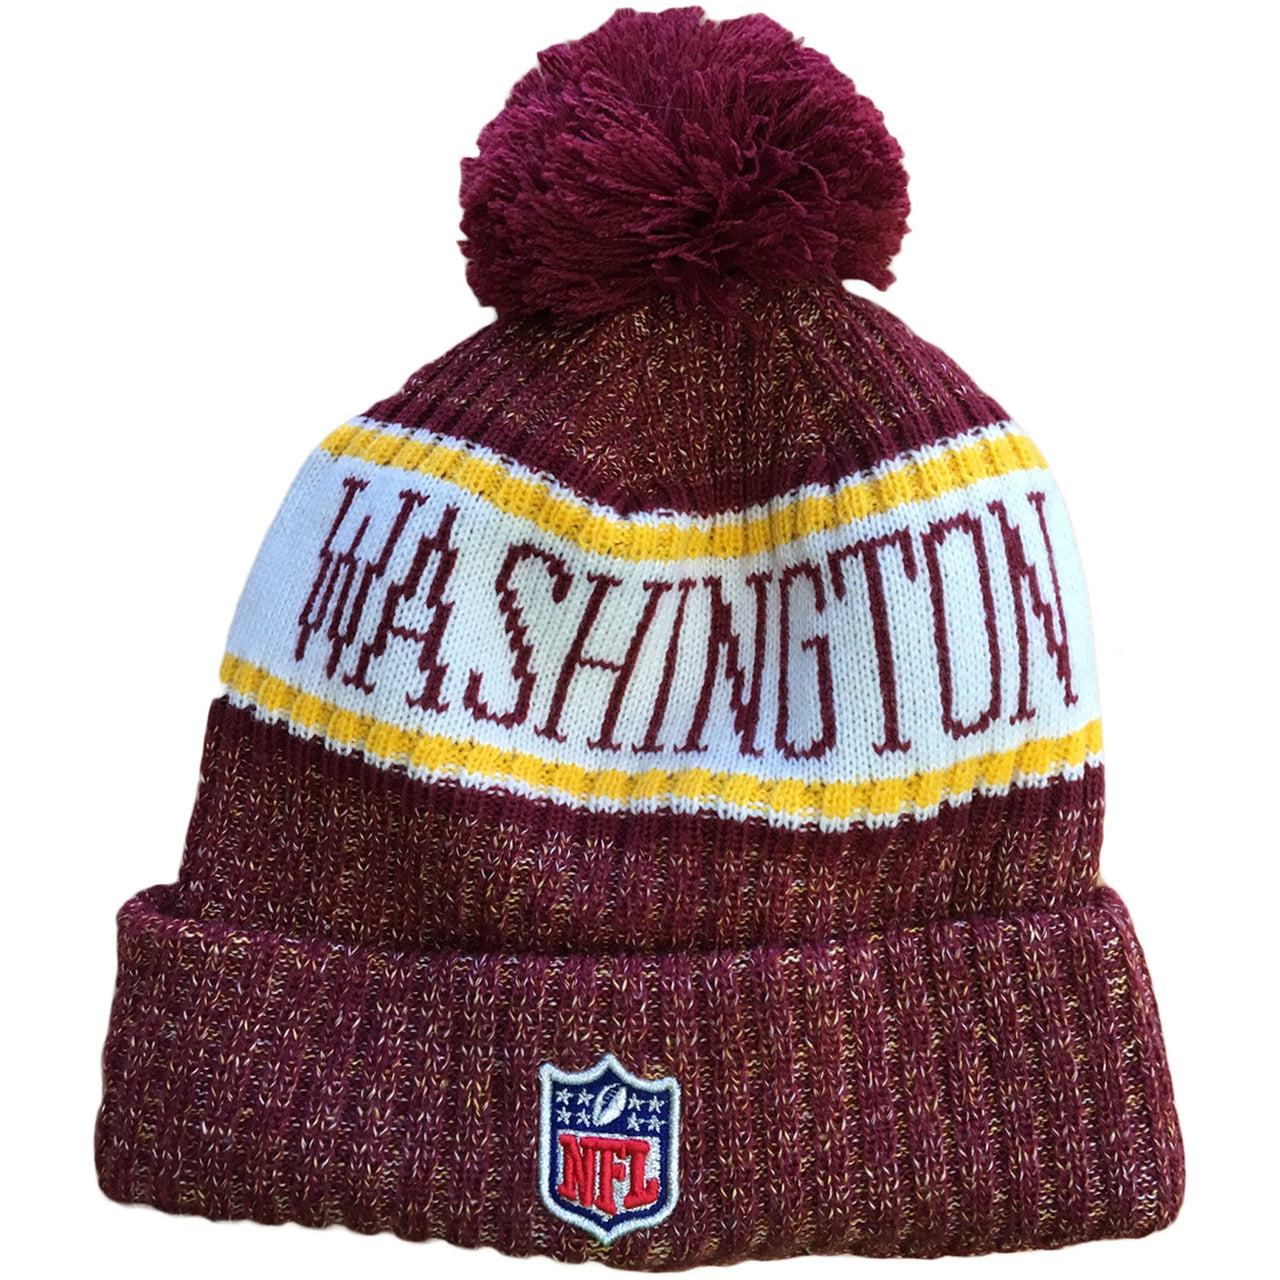 On the back of the 2018 Washington Redskins On-Field Sideline Cold Weather Beanie the NFL shield is embroidered.